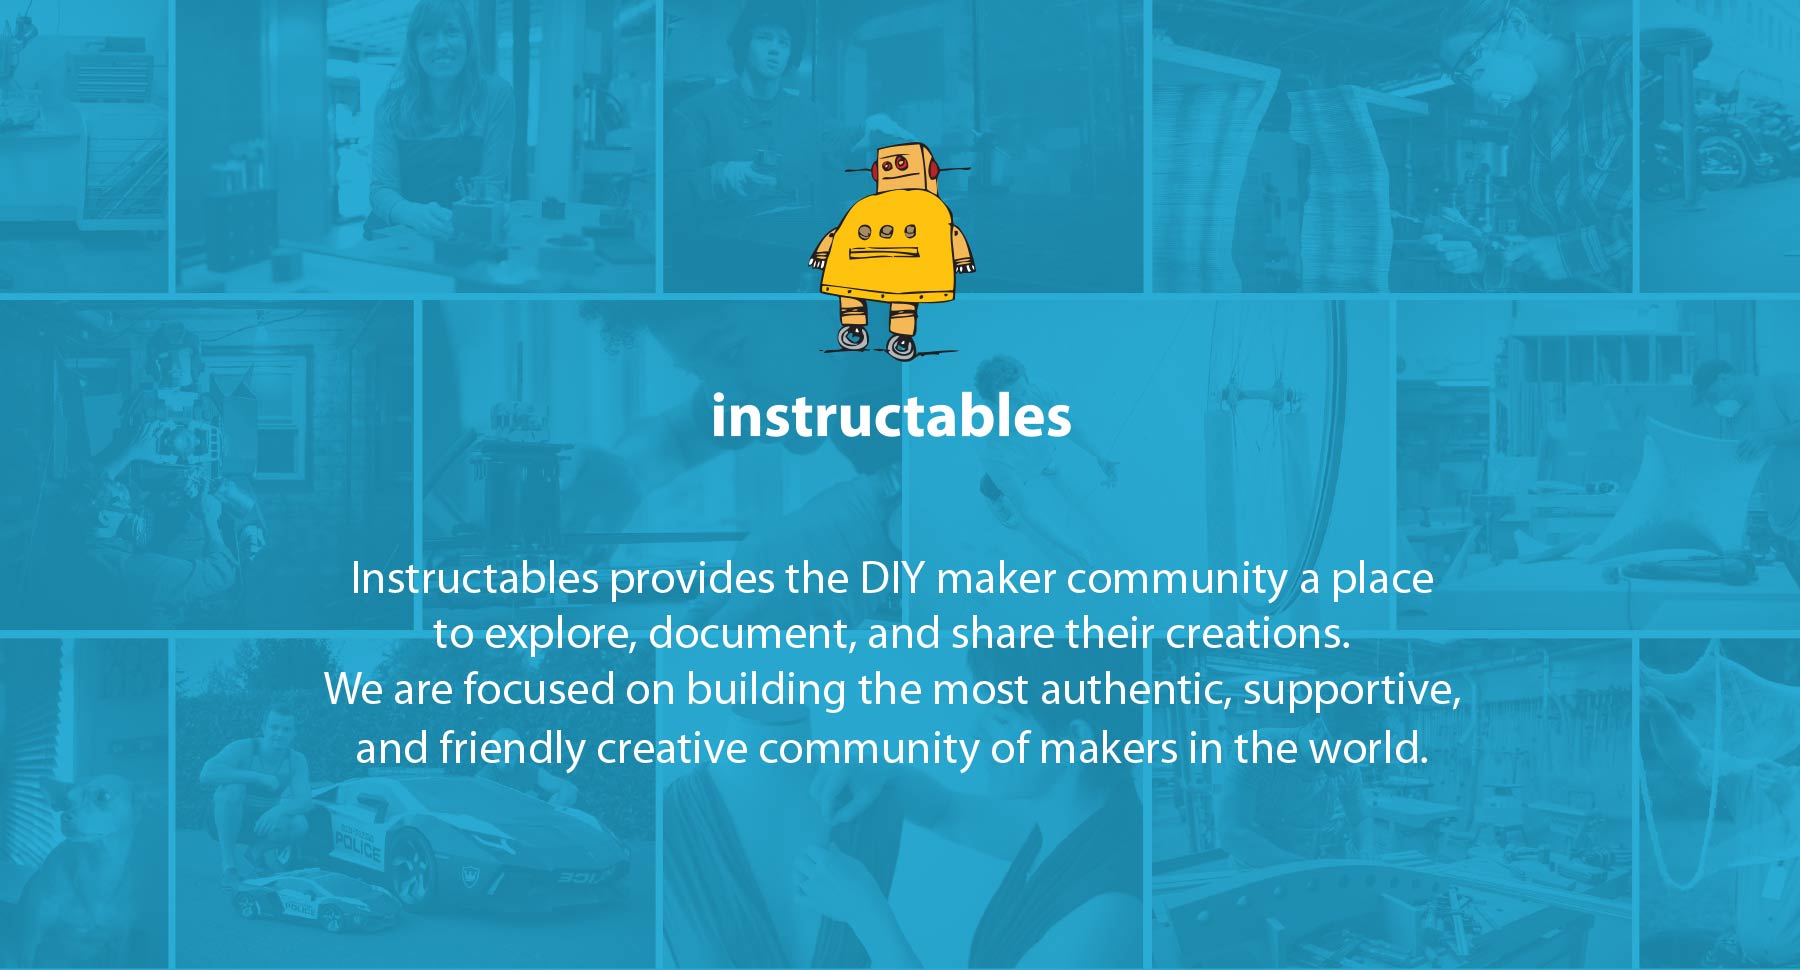 Instructables brand mission